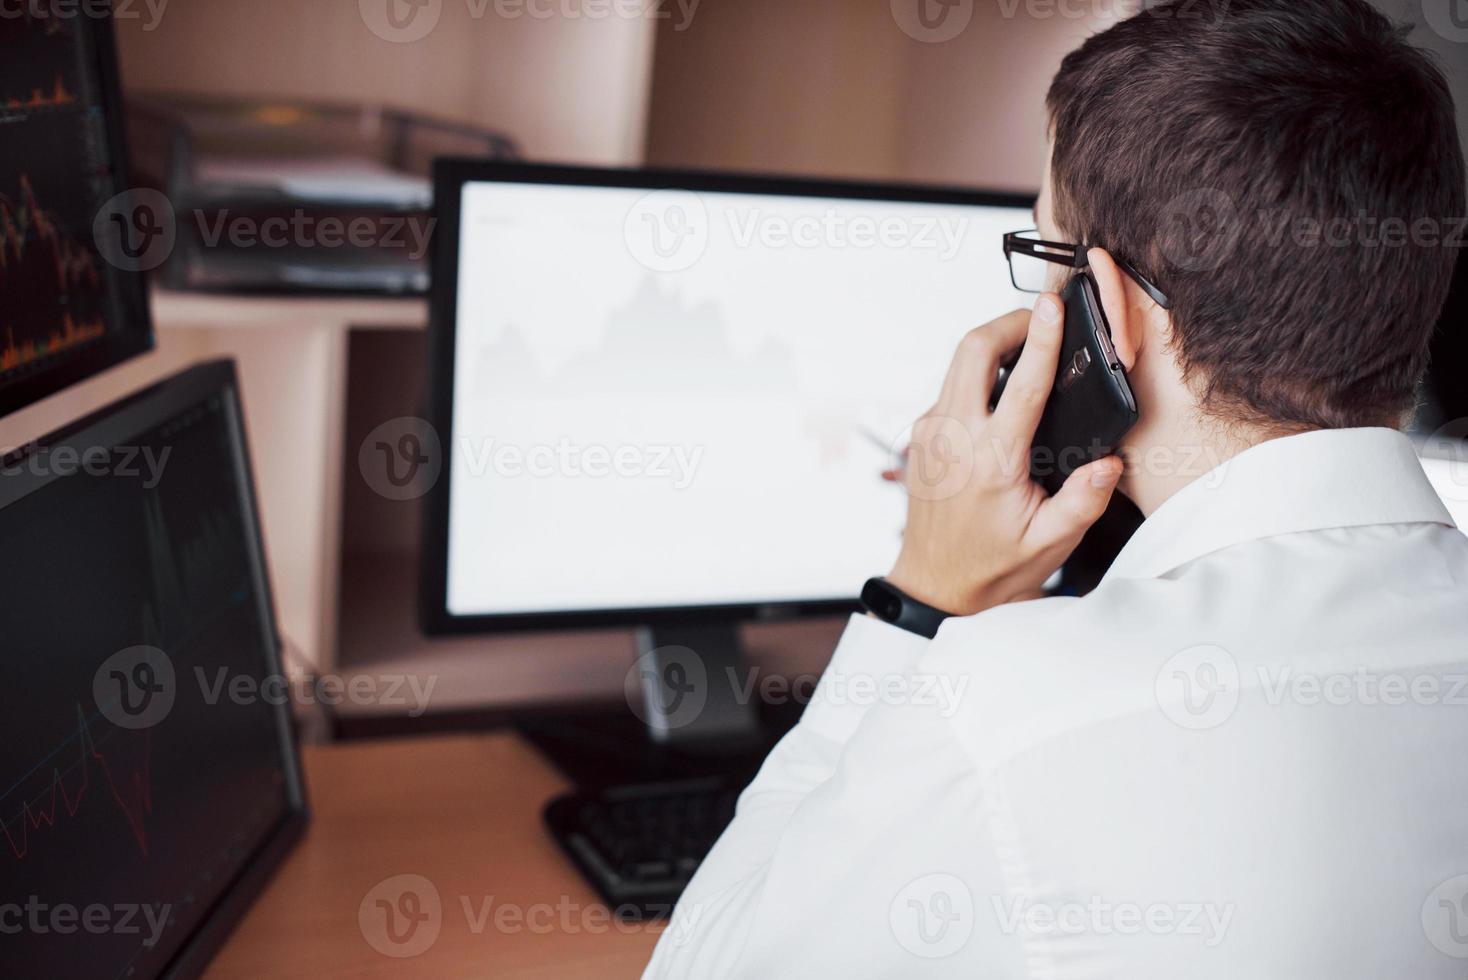 Over the shoulder view of and stock broker trading online while accepting orders by phone. Multiple computer screens ful of charts and data analyses in background photo